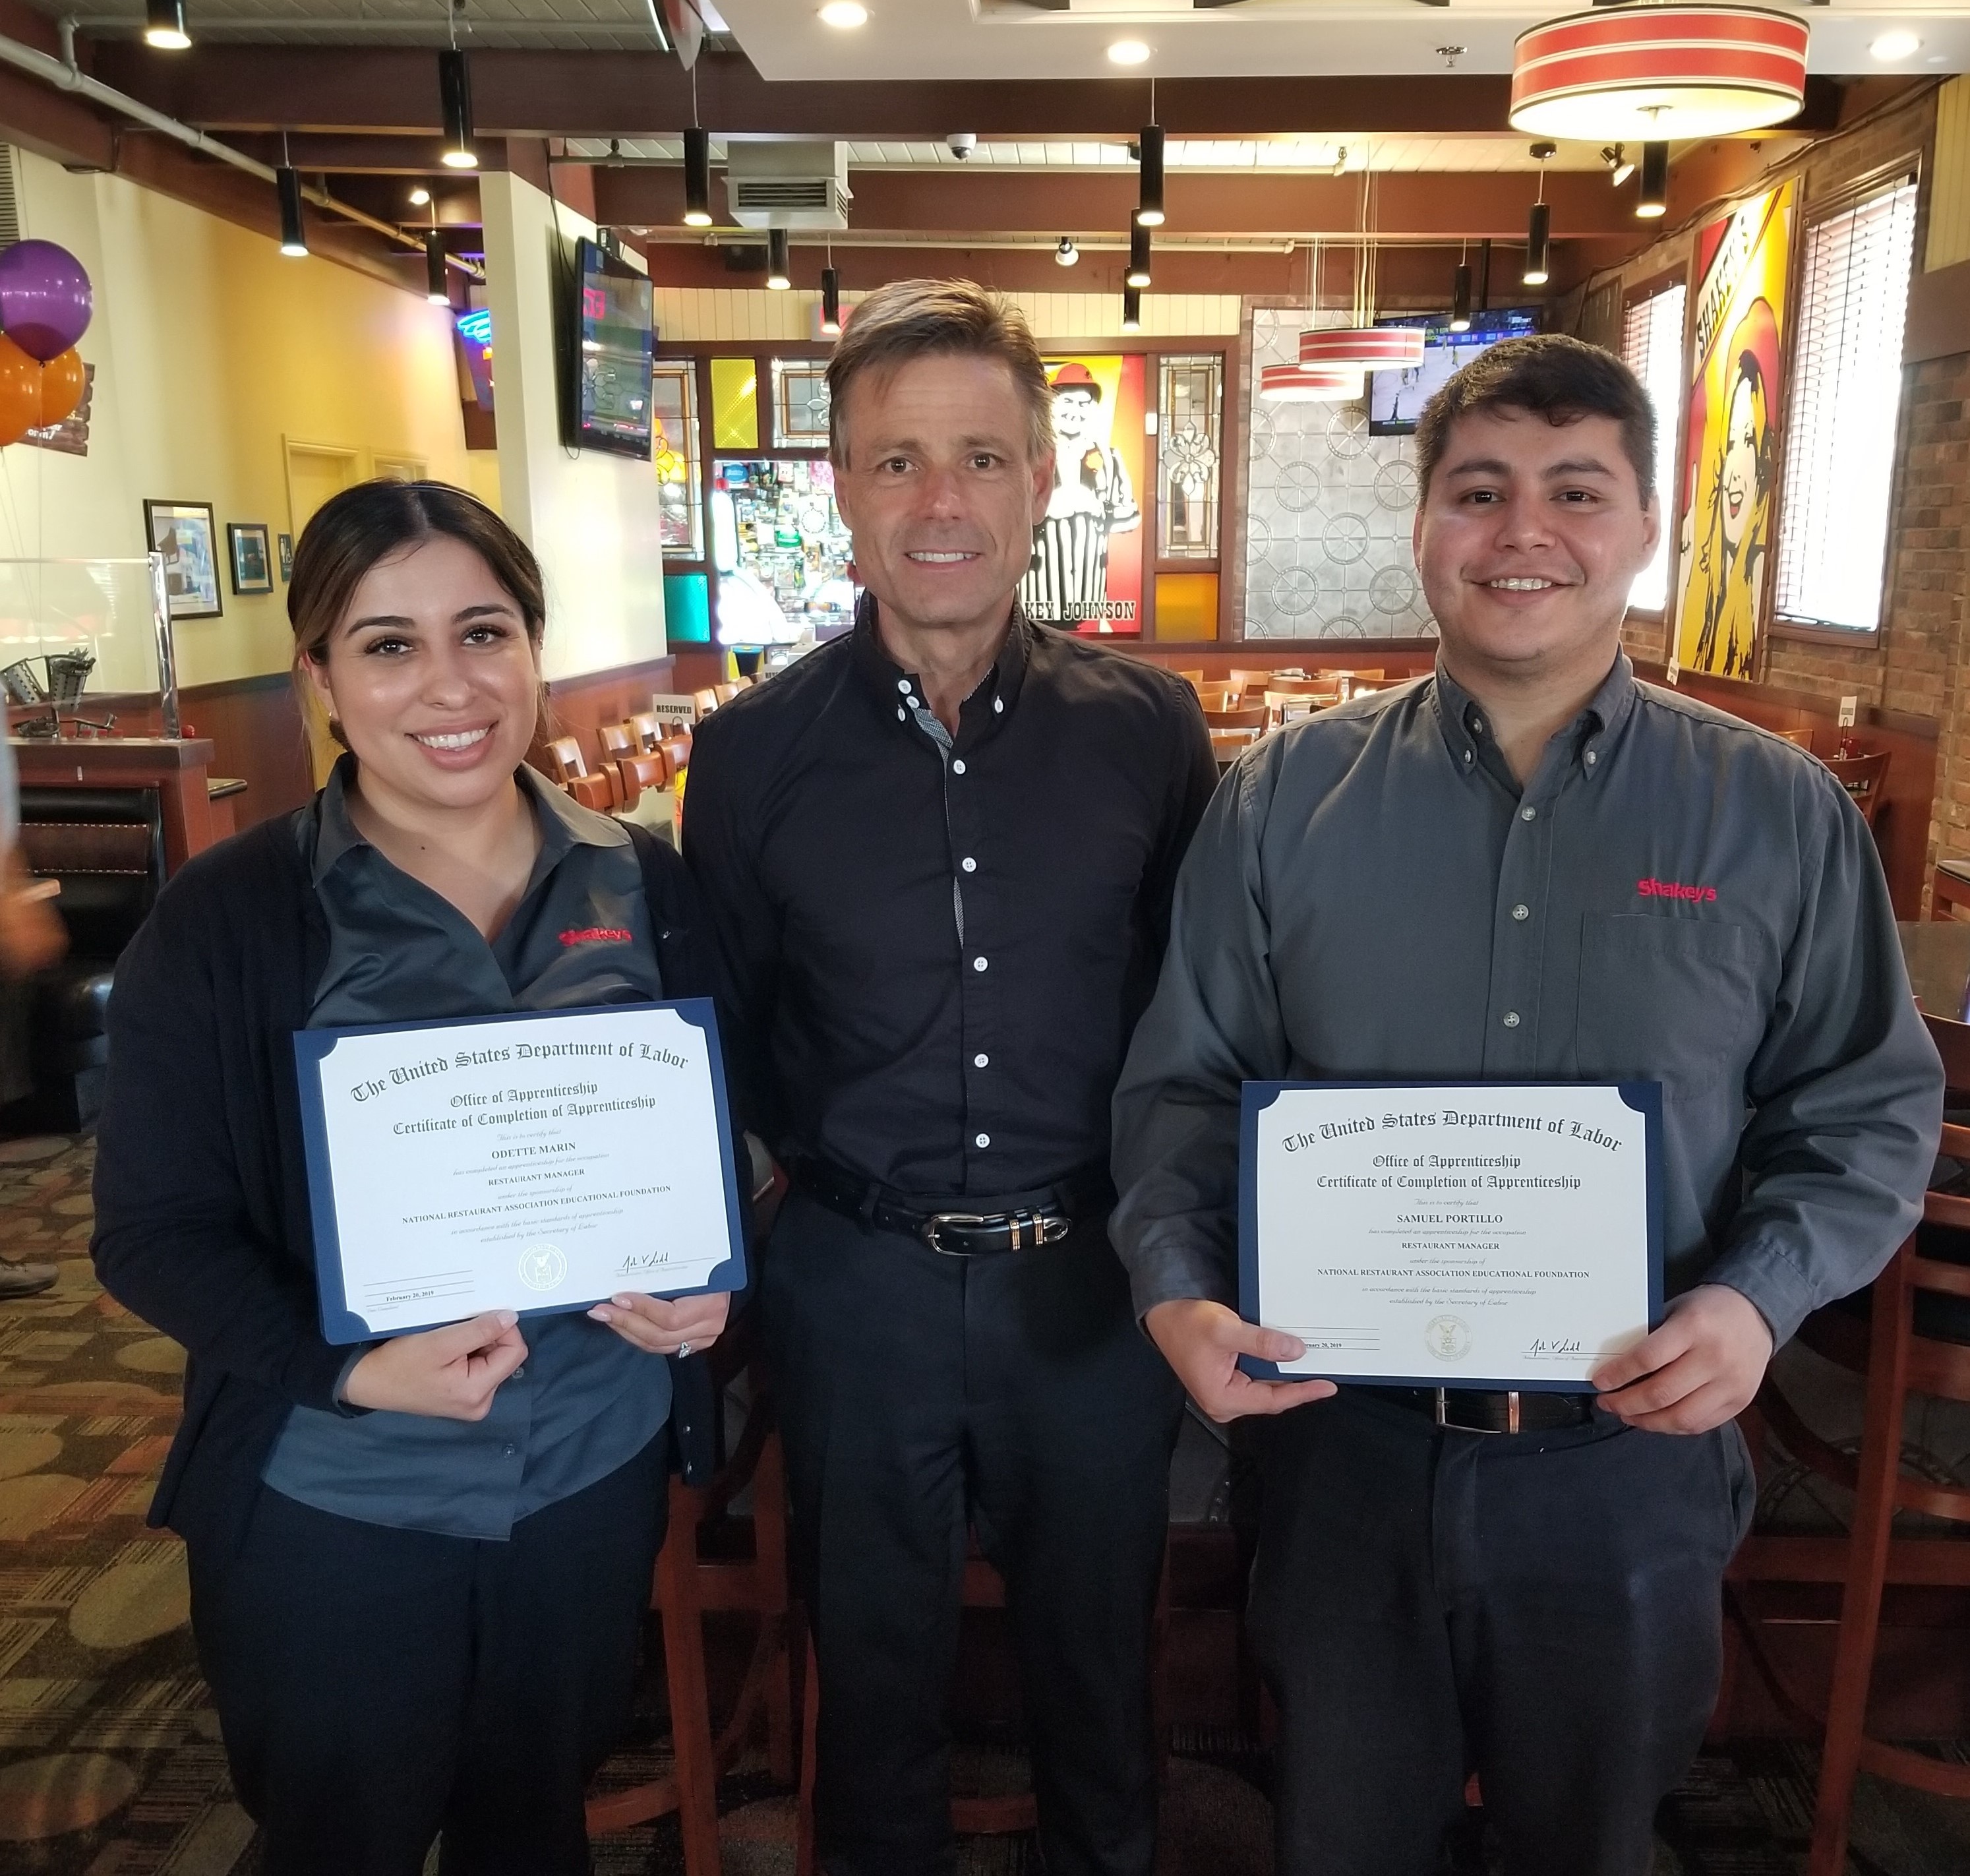 Nick Mayer, CEO of Shakey’s USA, Inc., with Odette Marin and Samuel Portillo, the first restaurant management apprentices to complete the national program.